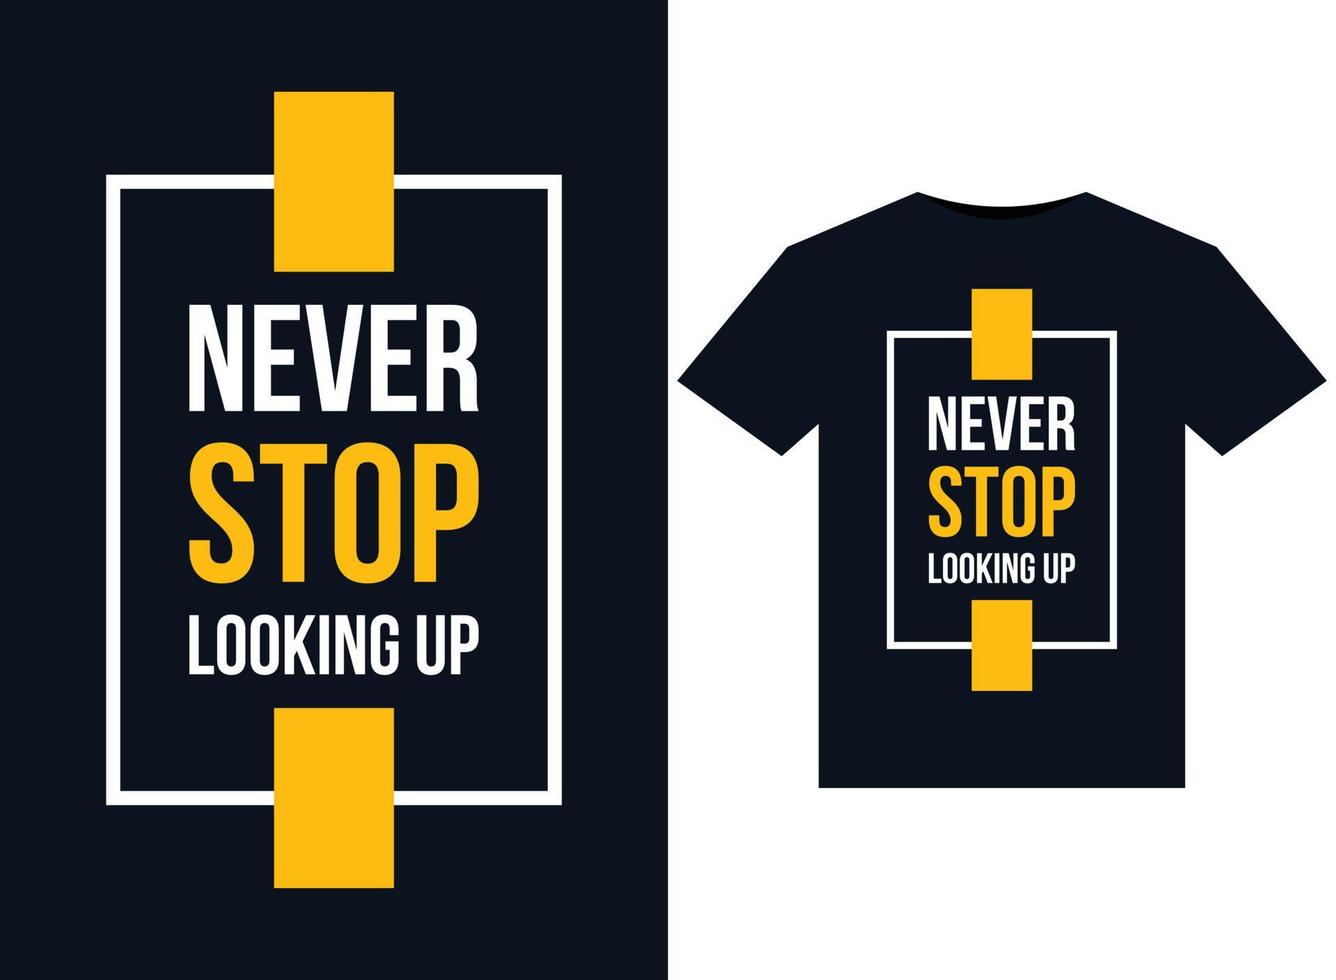 Never stop looking up illustrations for the print-ready T-Shirts design vector